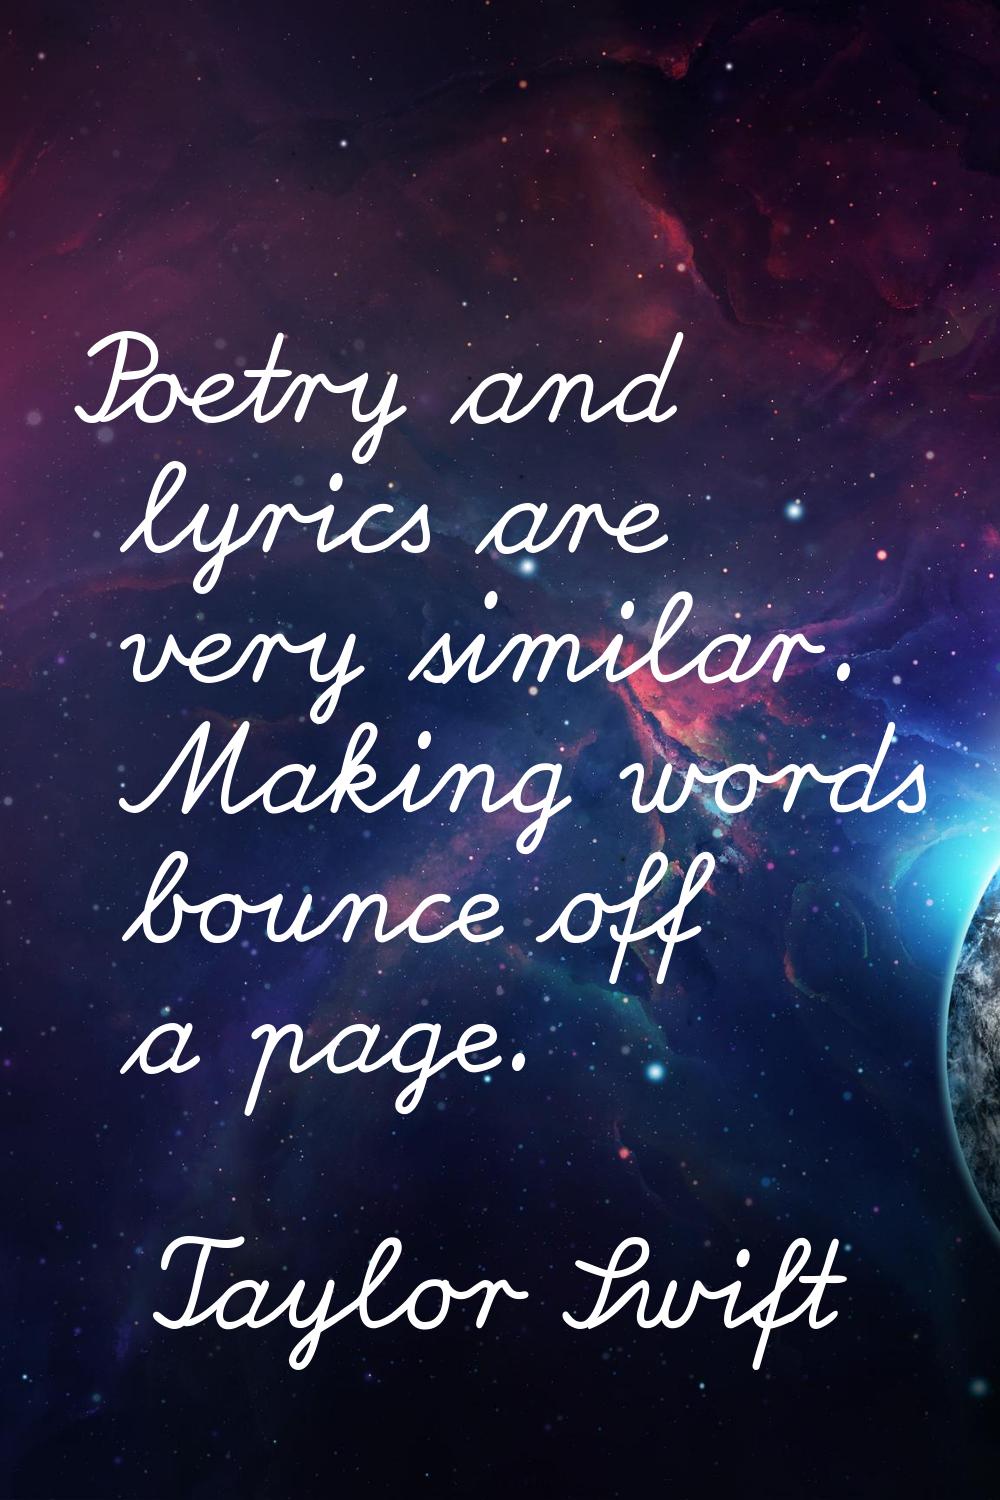 Poetry and lyrics are very similar. Making words bounce off a page.